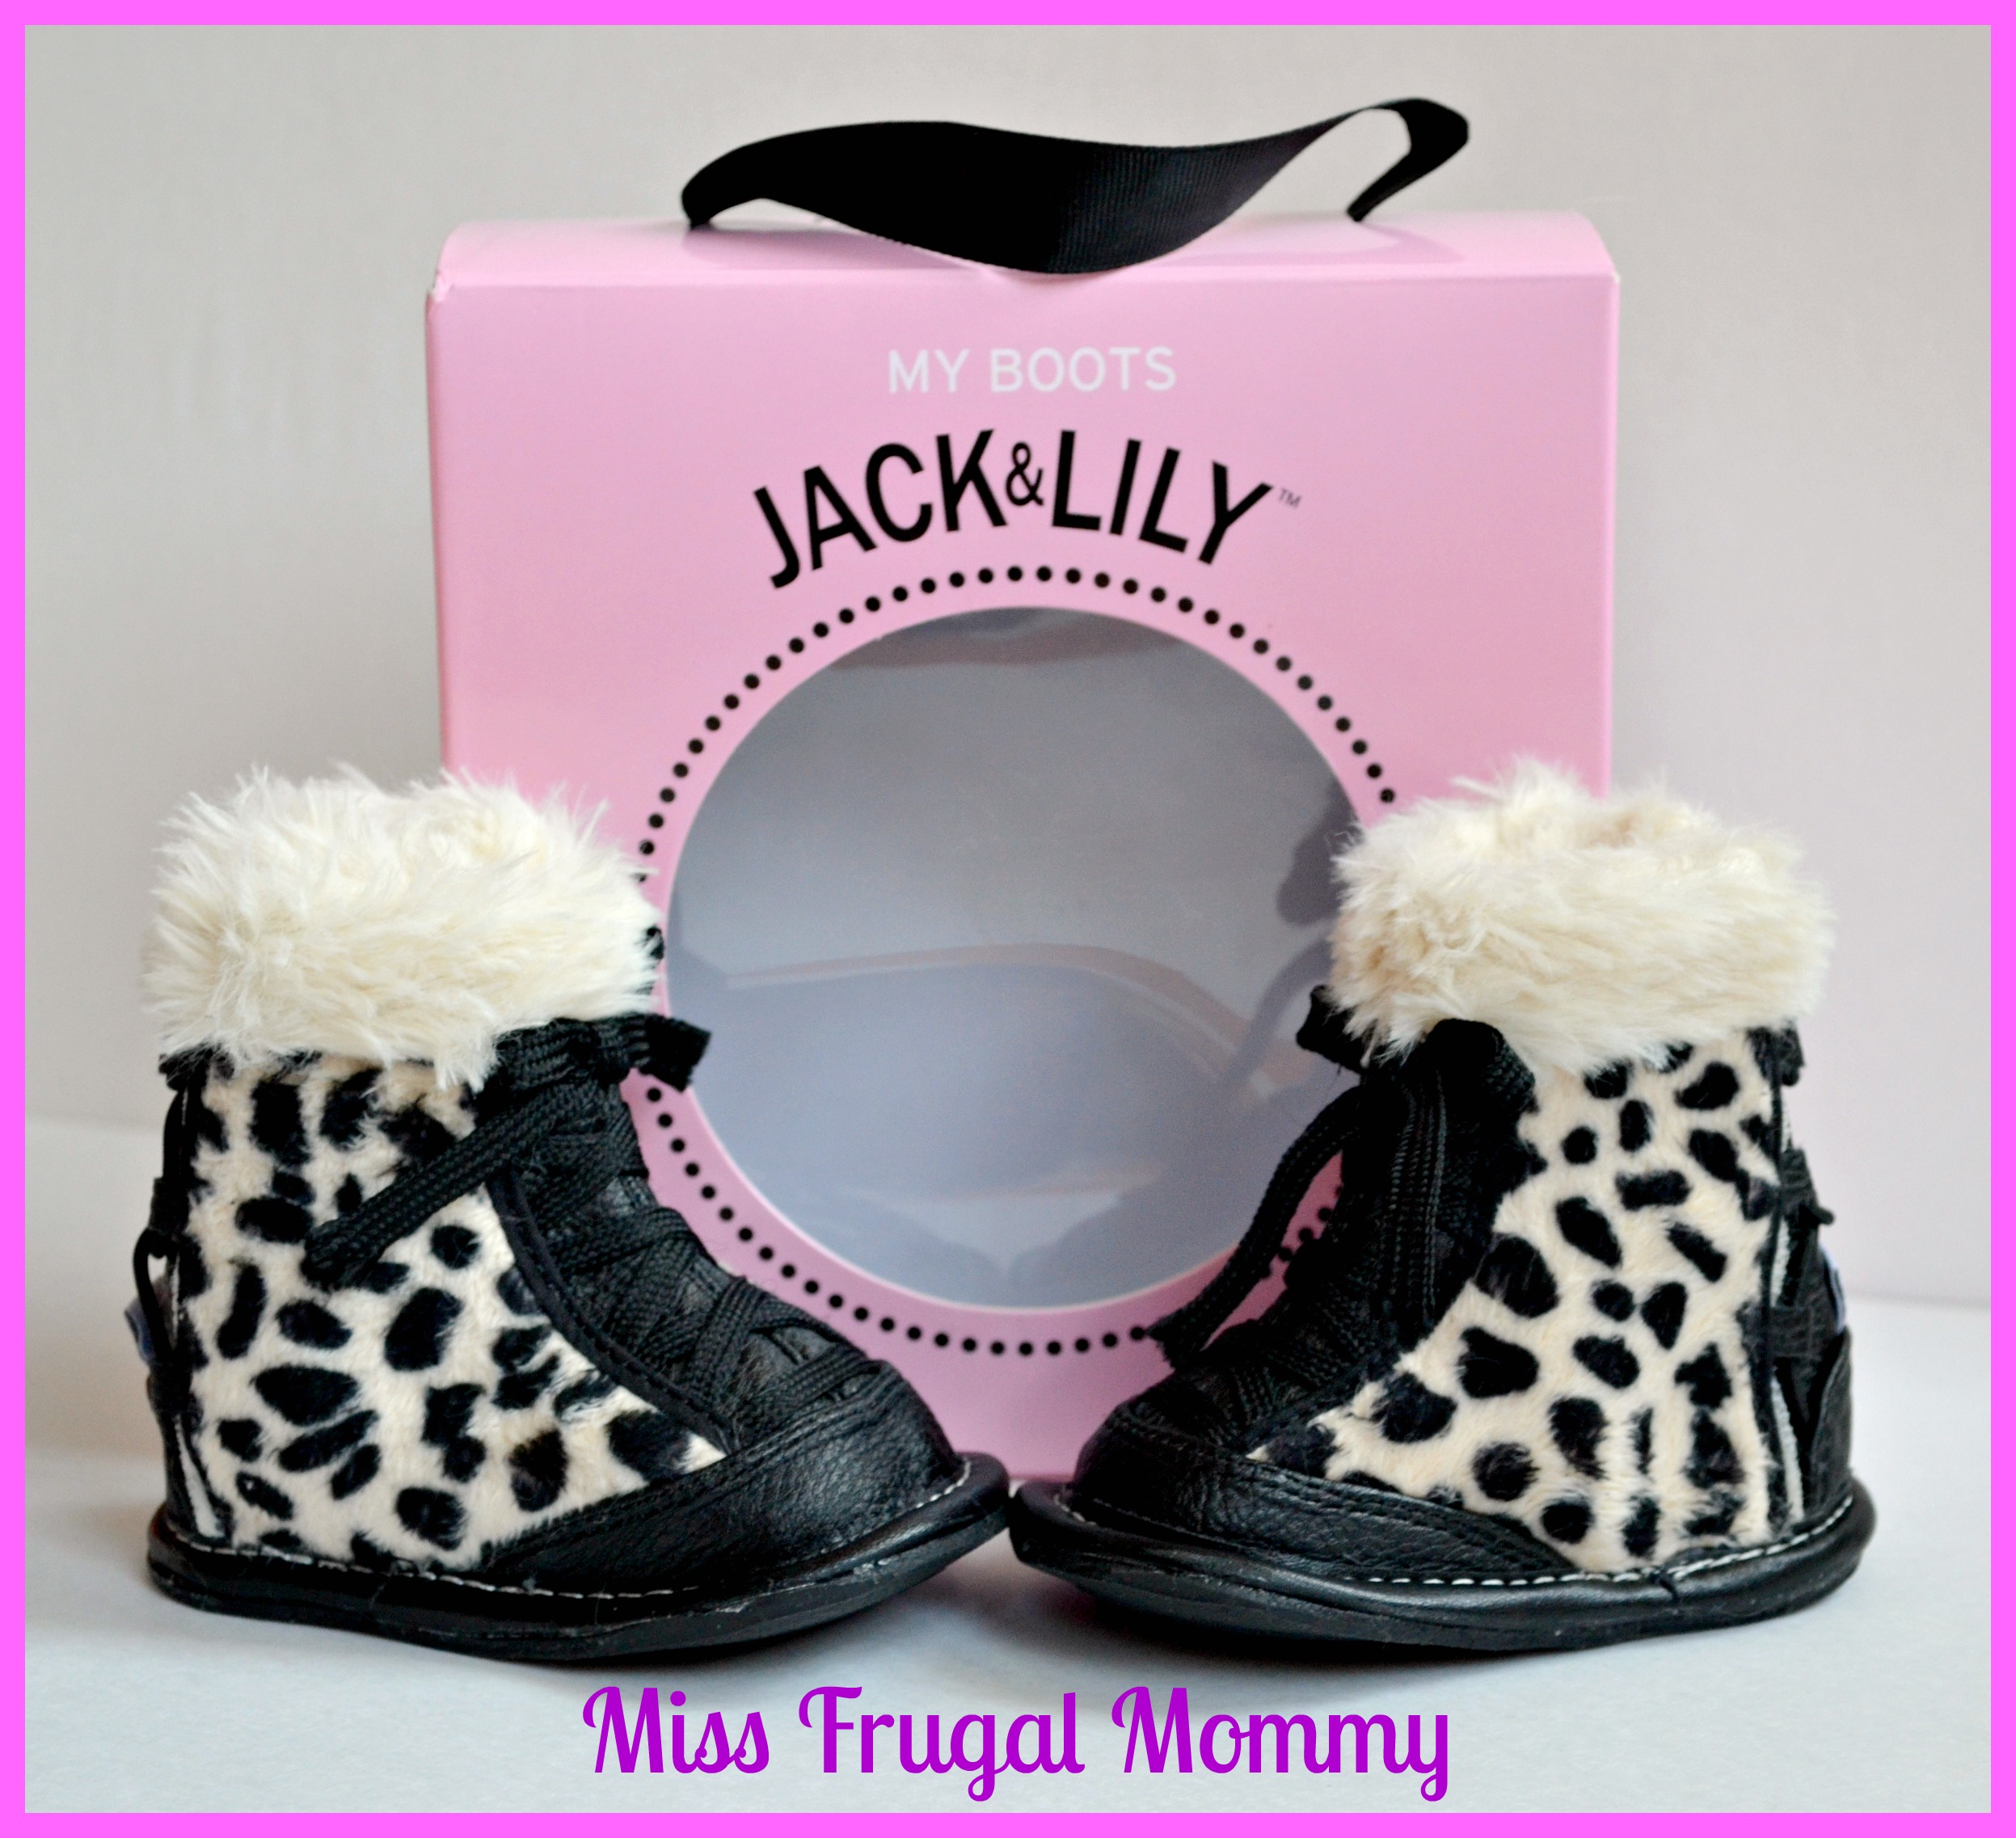 Jack & Lily Shoes Winner's Choice Giveaway ends 4/29